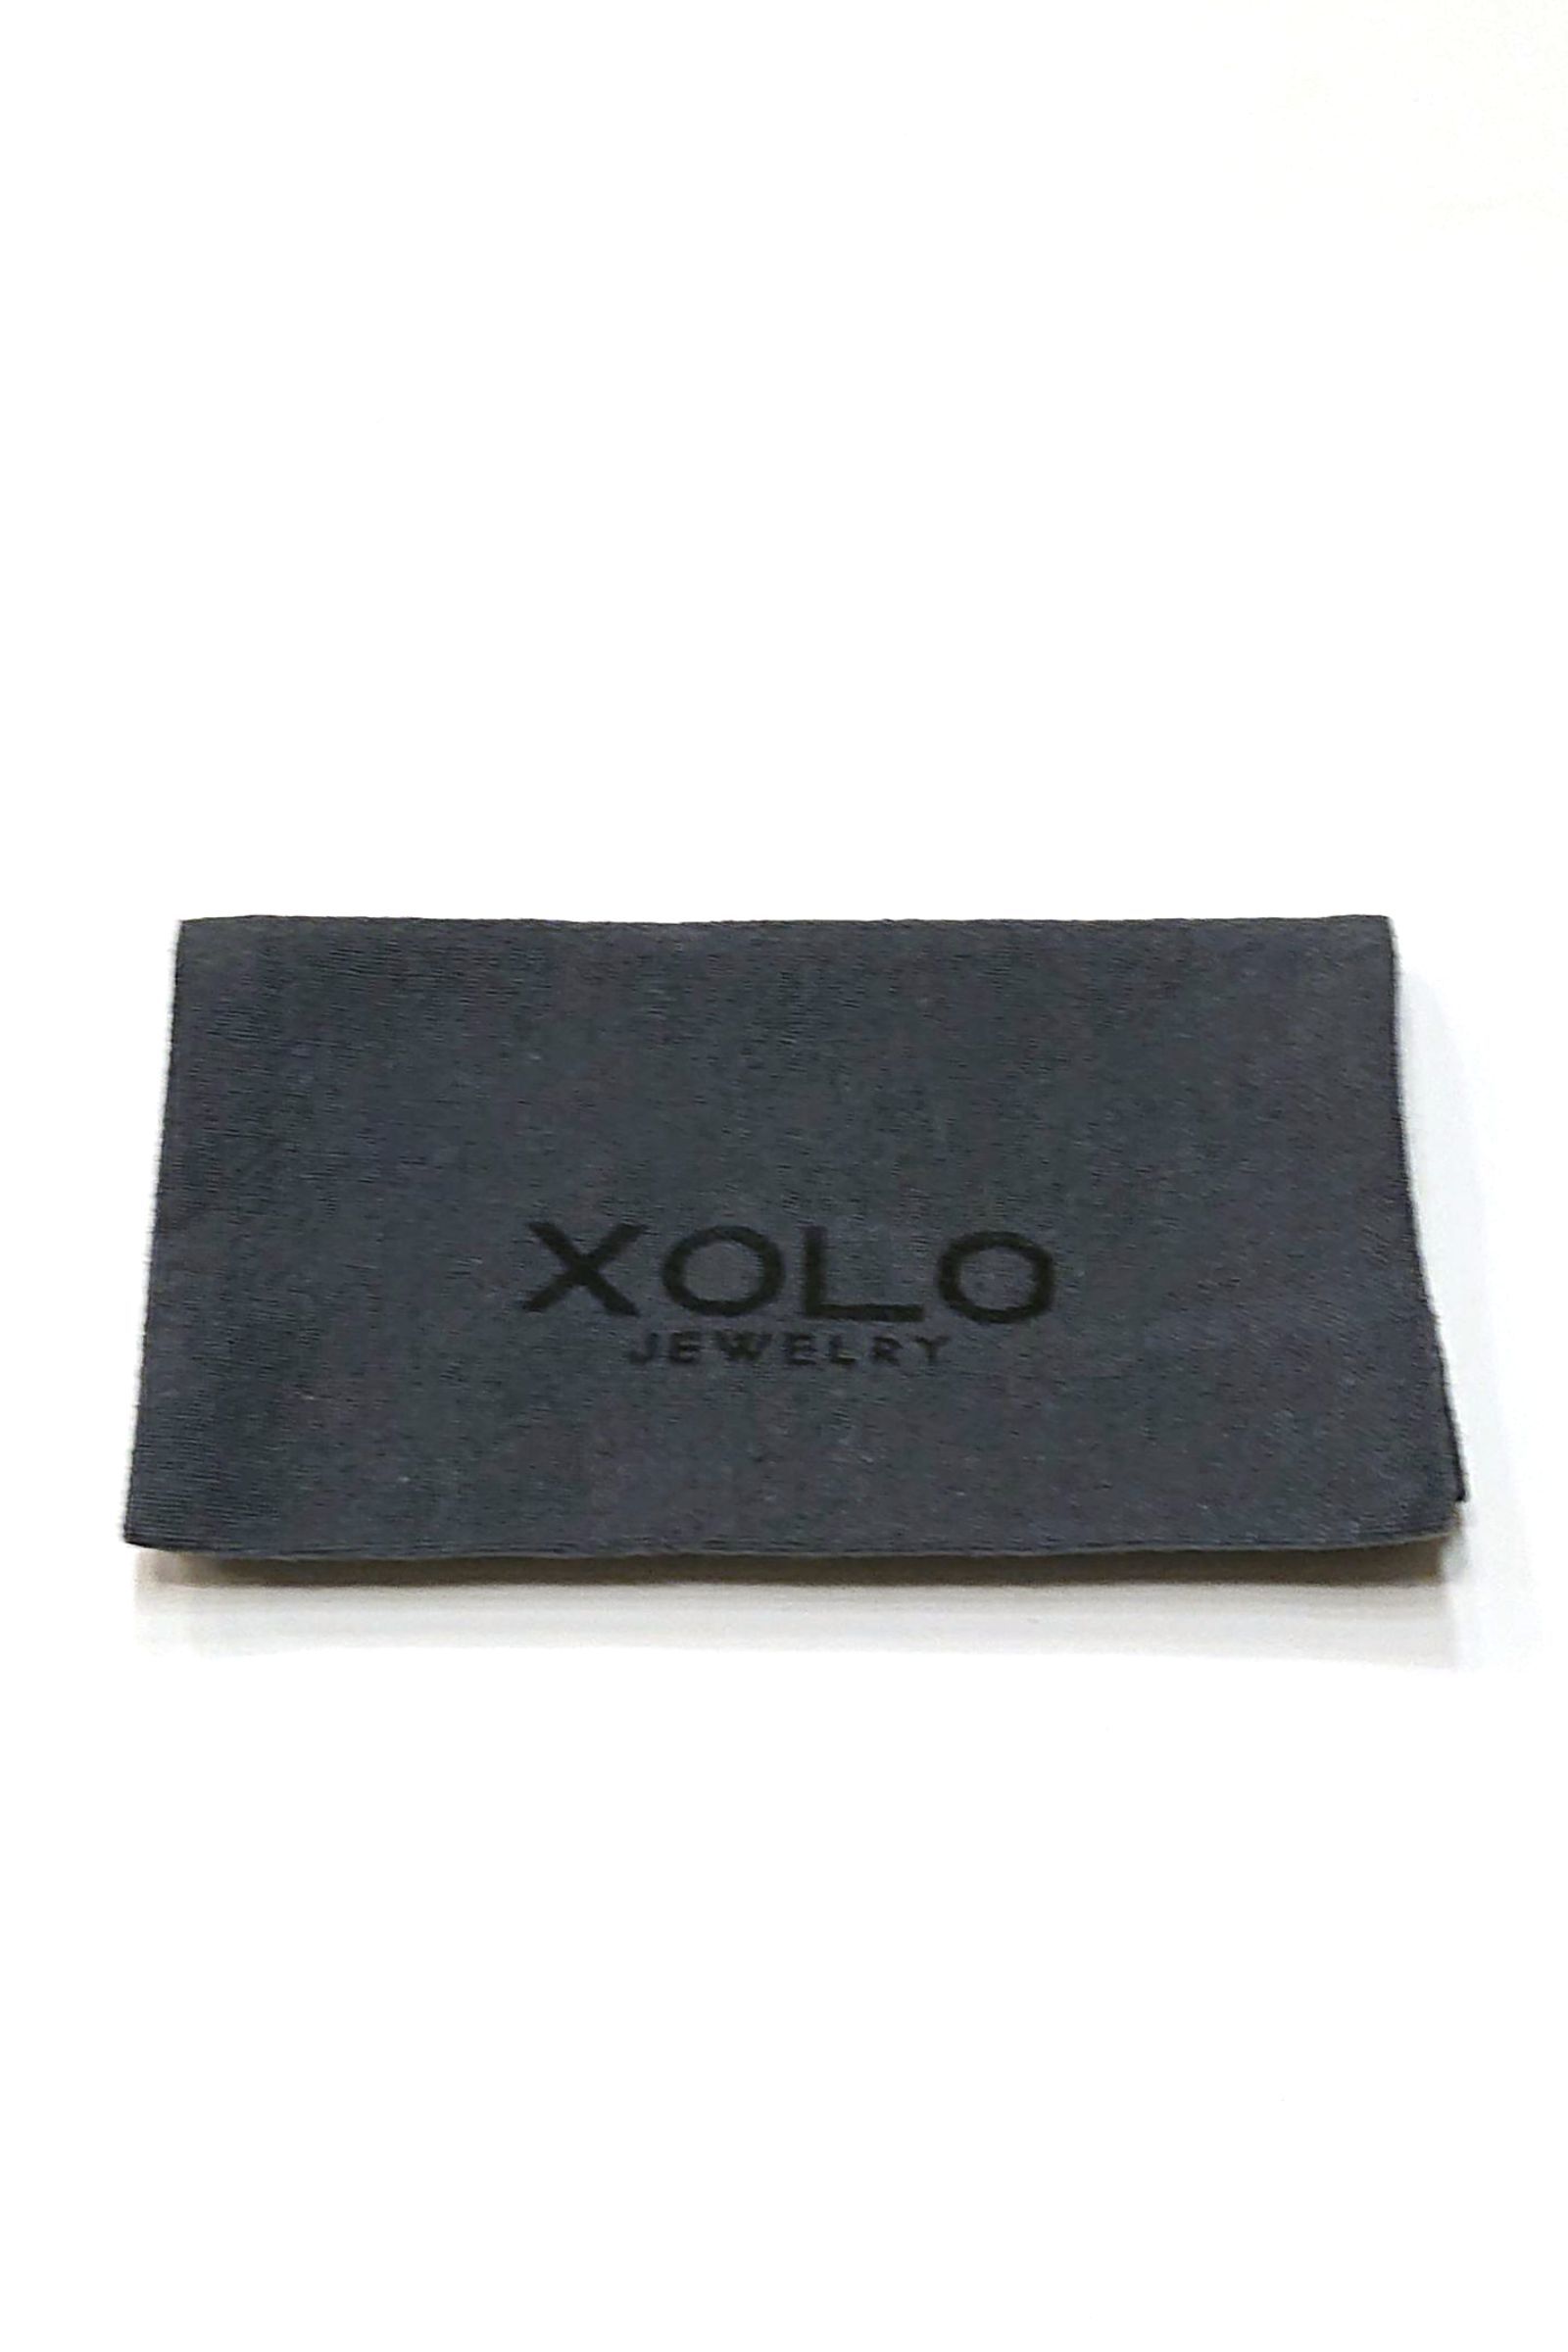 XOLO JEWELRY Concave from bangle アウトレット販売店舗